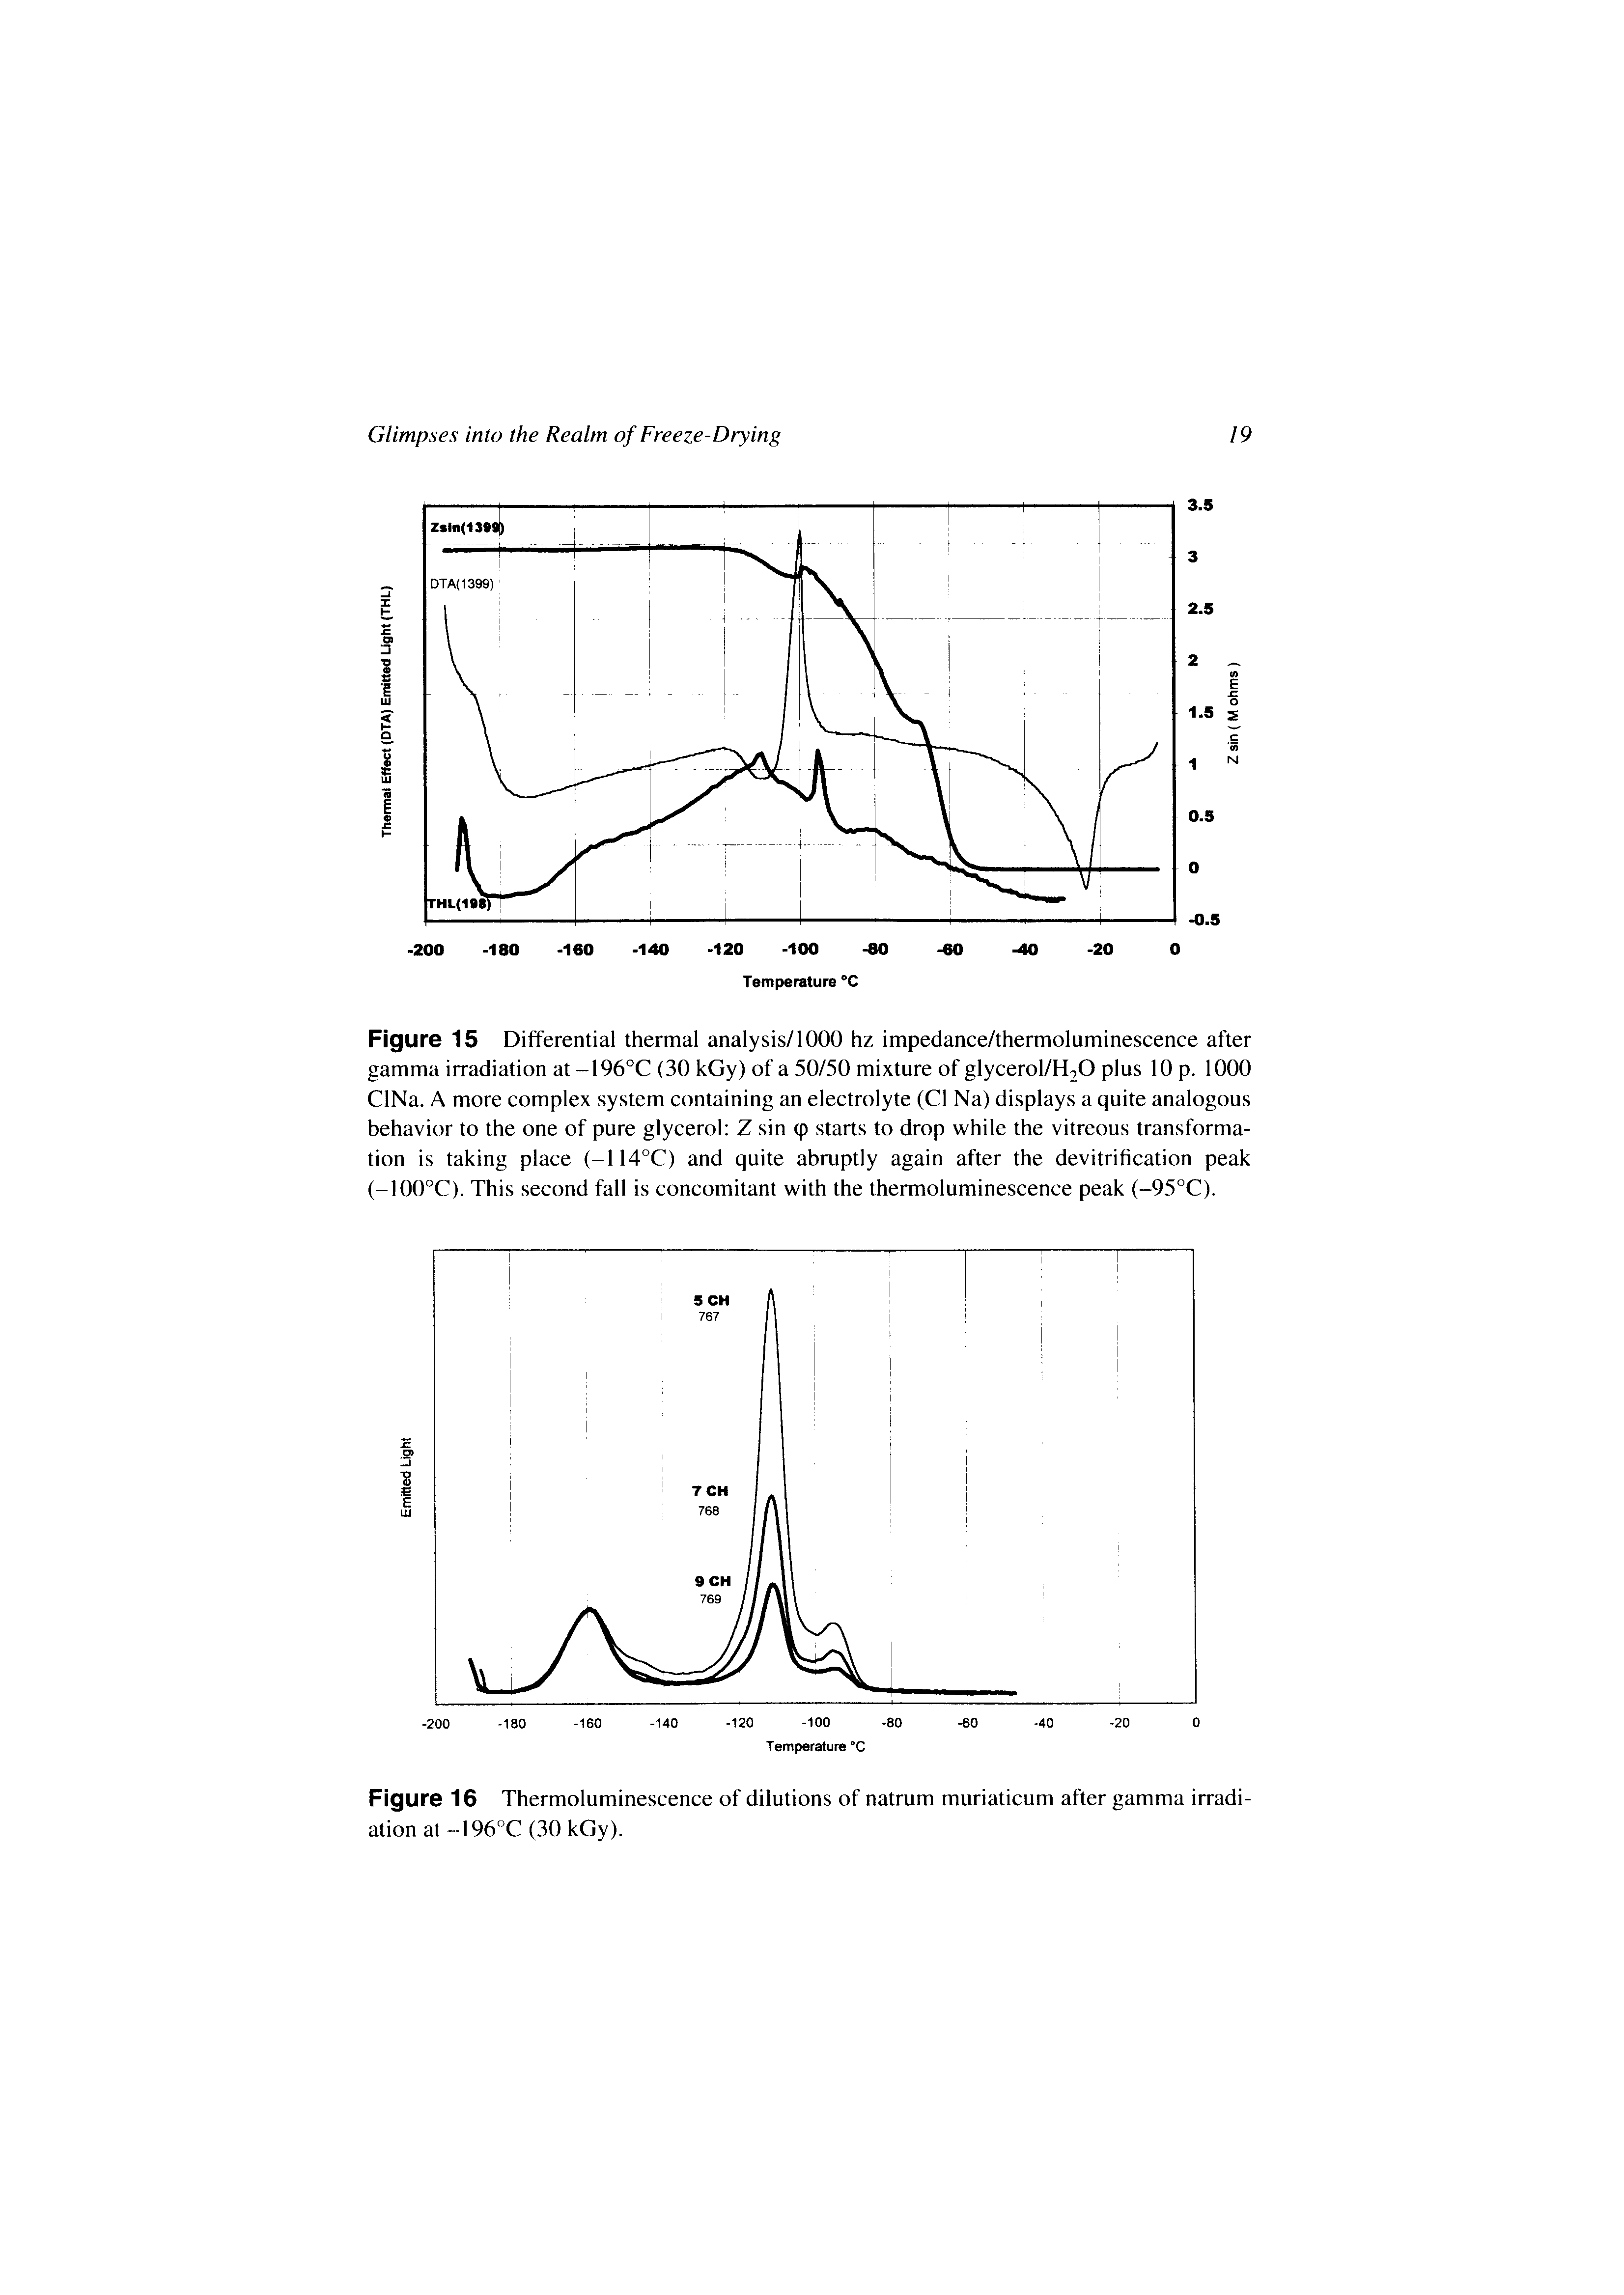 Figure 15 Differential thermal analysis/1000 hz impedance/thermoluminescence after gamma irradiation at -196°C (30 kGy) of a 50/50 mixture of glycerol/H O plus 10 p. 1000 ClNa. A more complex system containing an electrolyte (Cl Na) displays a quite analogous behavior to the one of pure glycerol Z sin (p starts to drop while the vitreous transformation is taking place (-114°C) and quite abruptly again after the devitrification peak (-100°C). This second fall is concomitant with the thermoluminescence peak (-95°C).